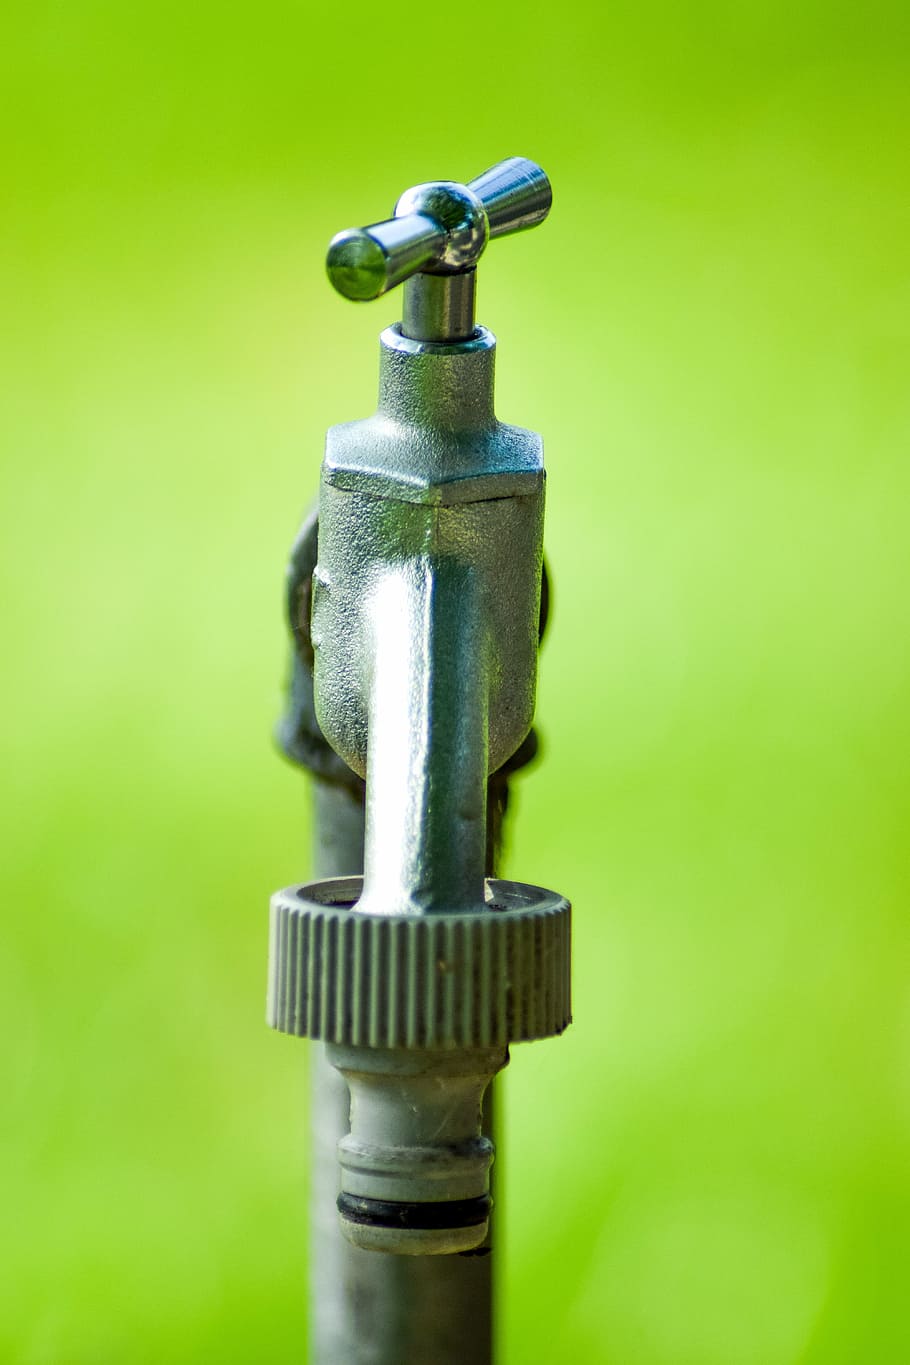 faucet, water, hahn, valve, connection, drinking water, metal, water dispenser, cold water, well water